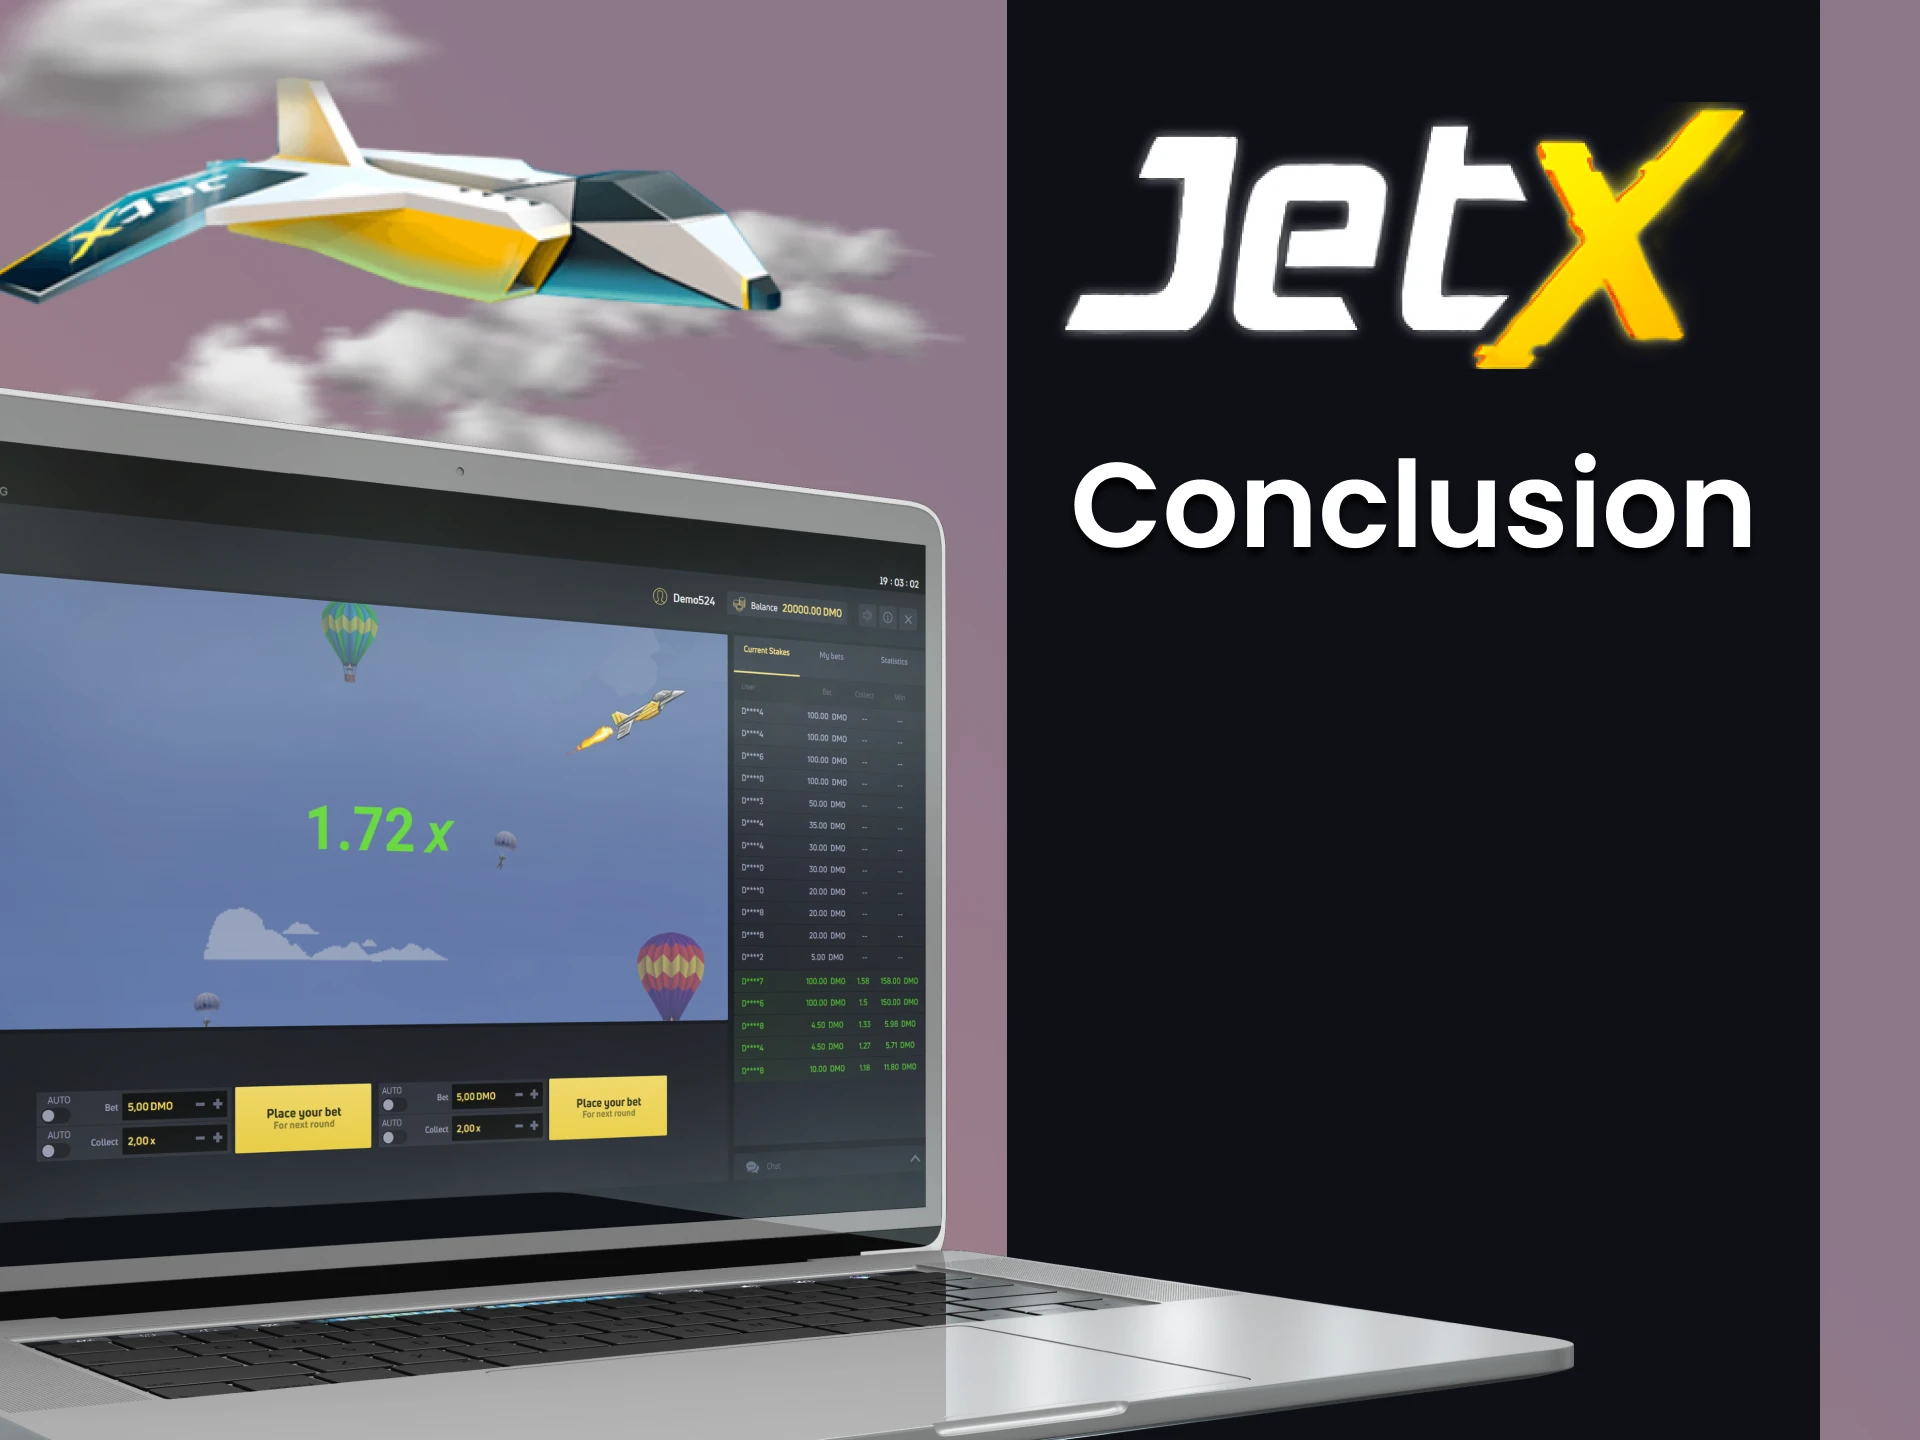 The demo version of JetX is ideal for training.